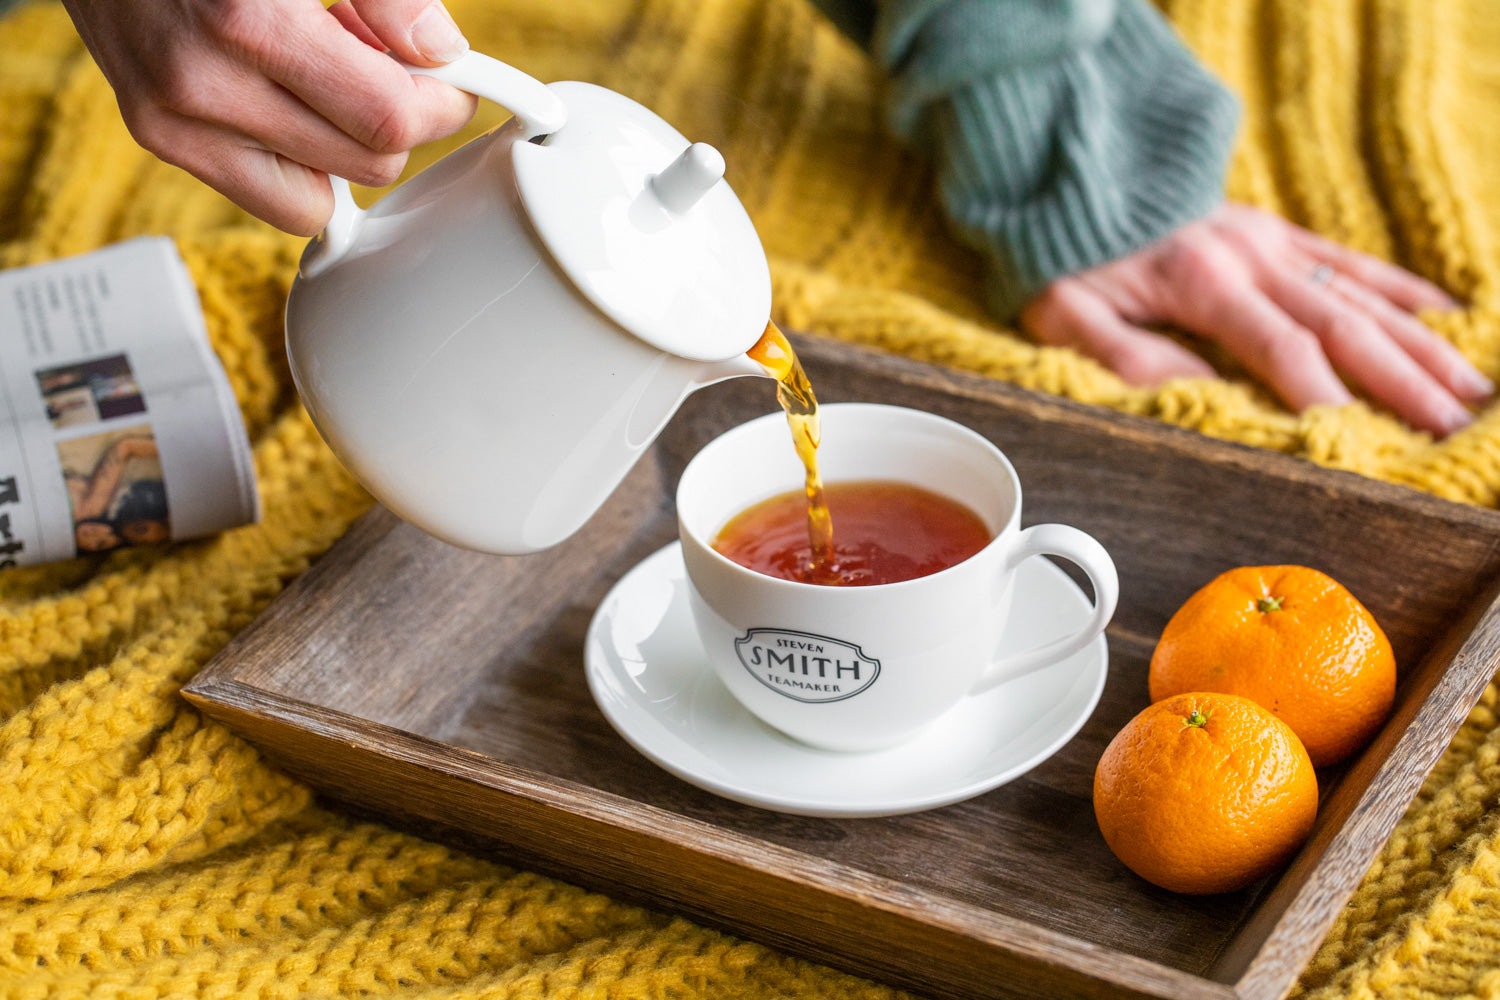 White teapot pouring black tea into Smith Teamaker teacup on wooden tray with tangerines.